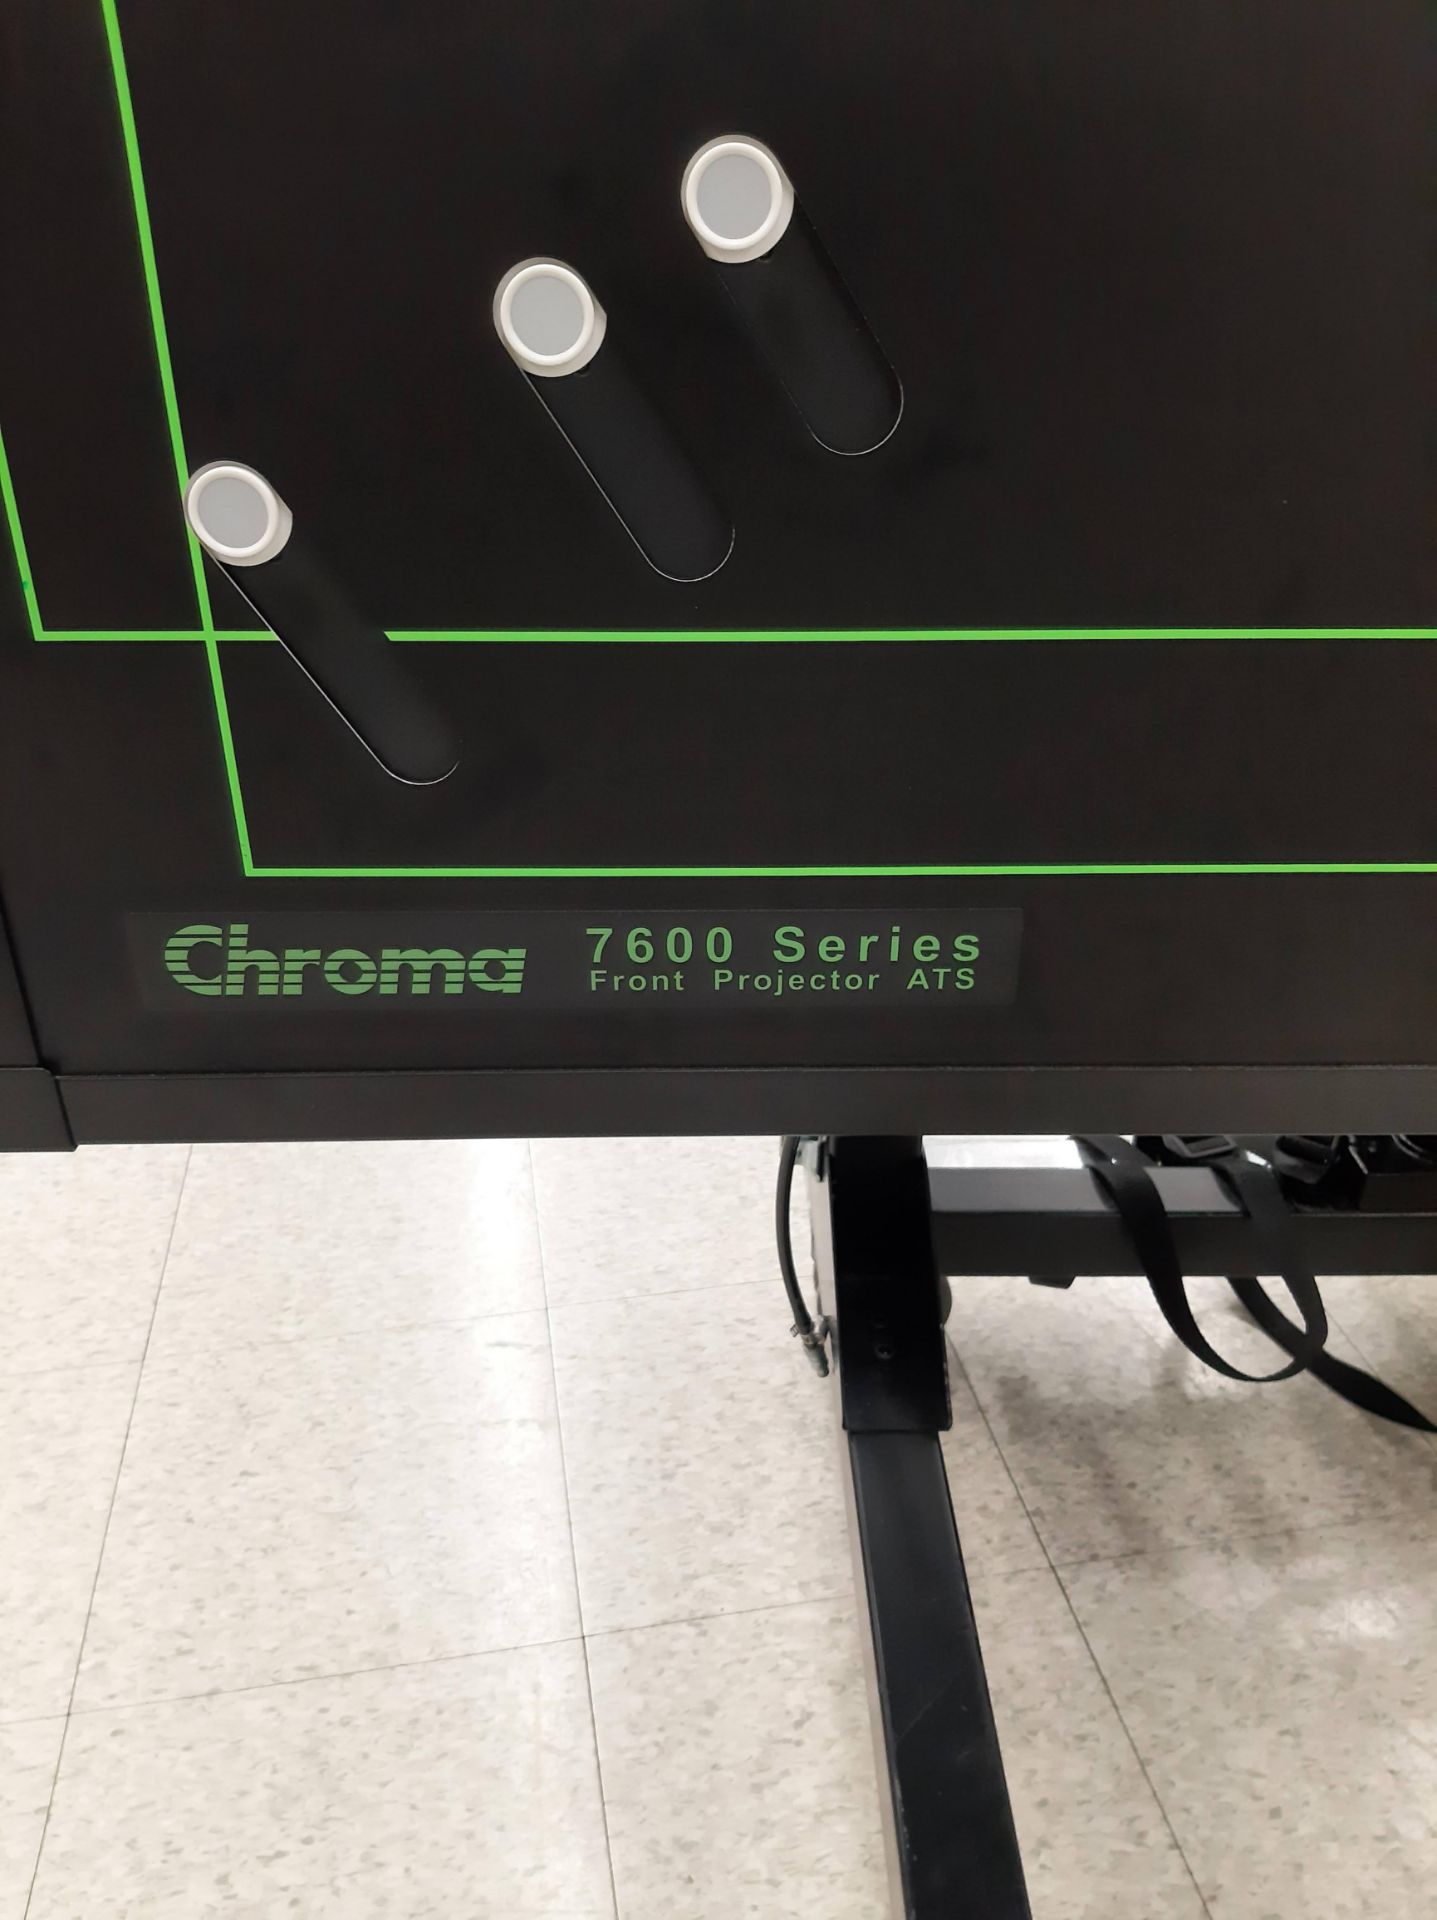 CHROMA 7600 SERIES FRONT PROJECTOR ATS - Image 2 of 6